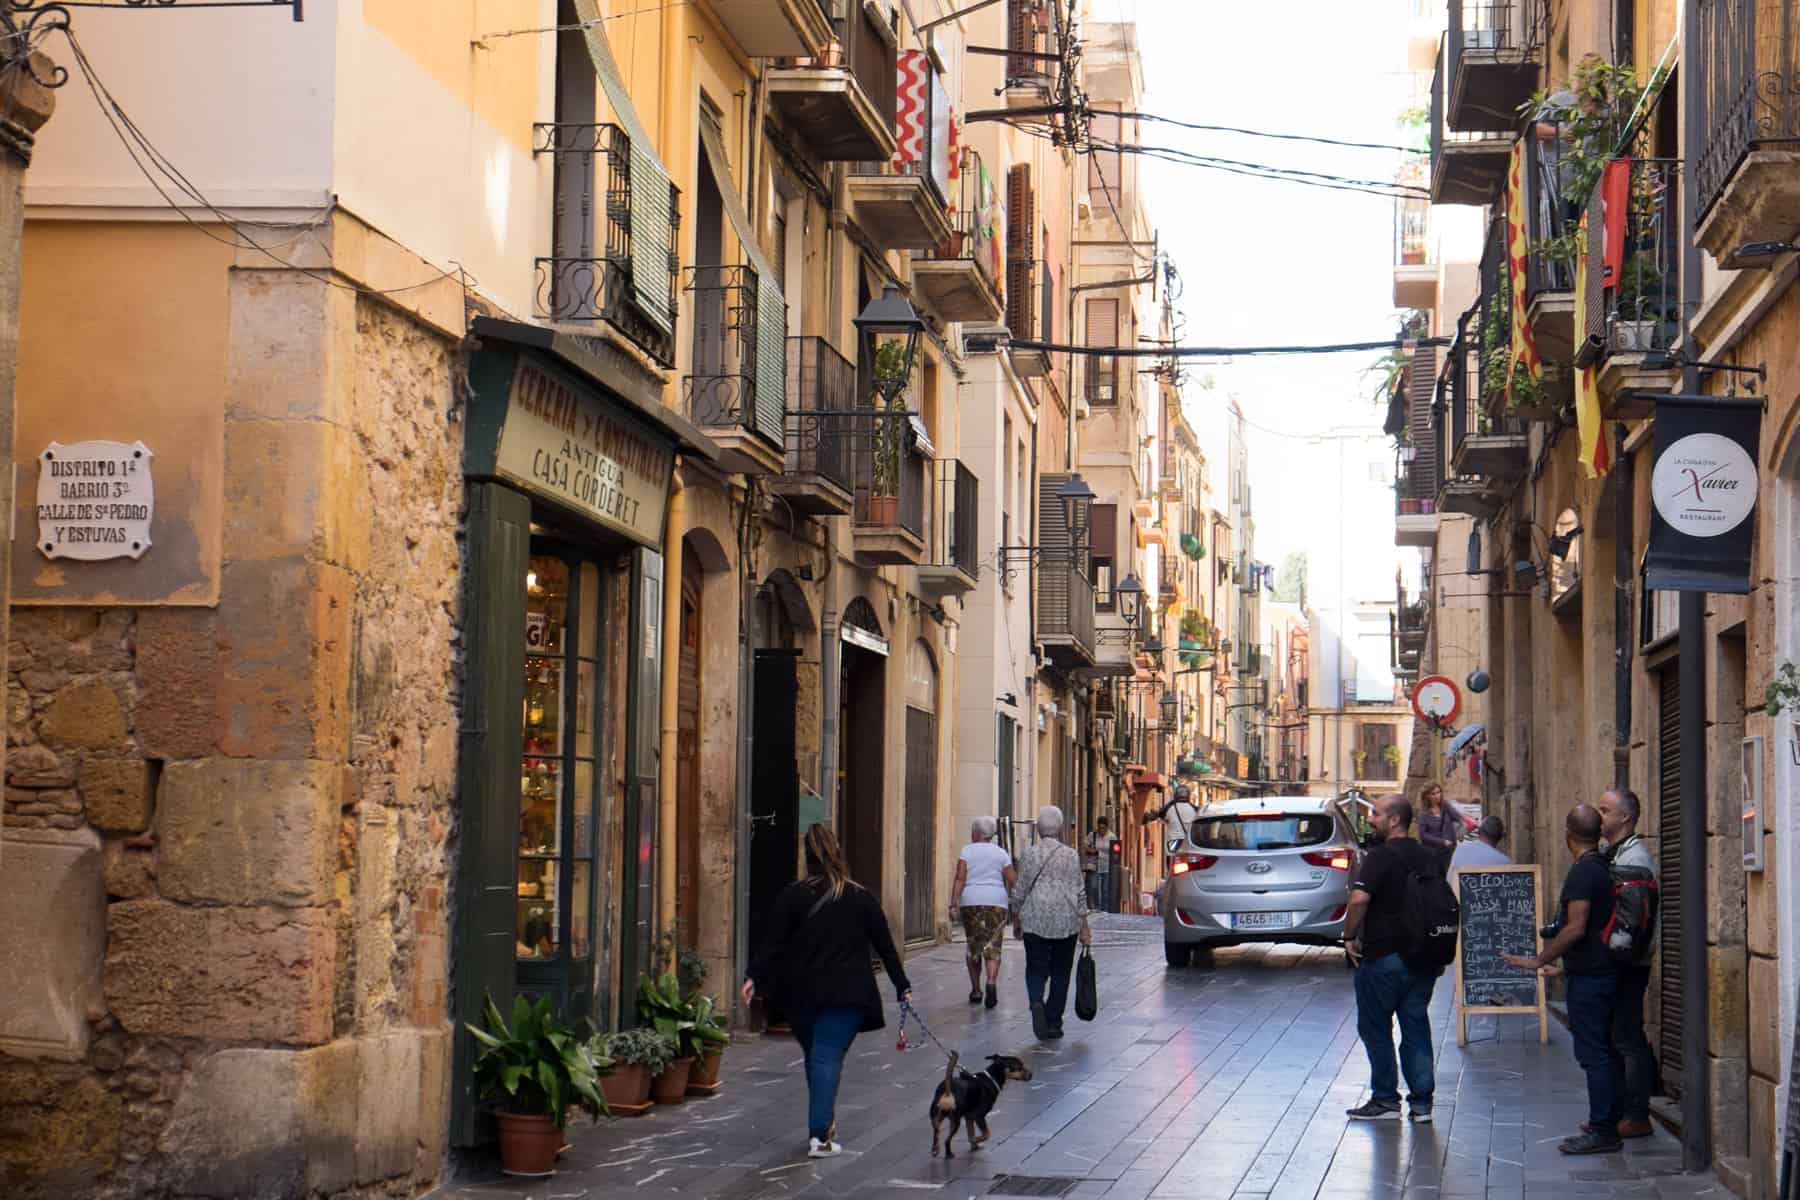 A woman walks with her dog and people gather in the golden yellow streets of Tarragona, Spain. 